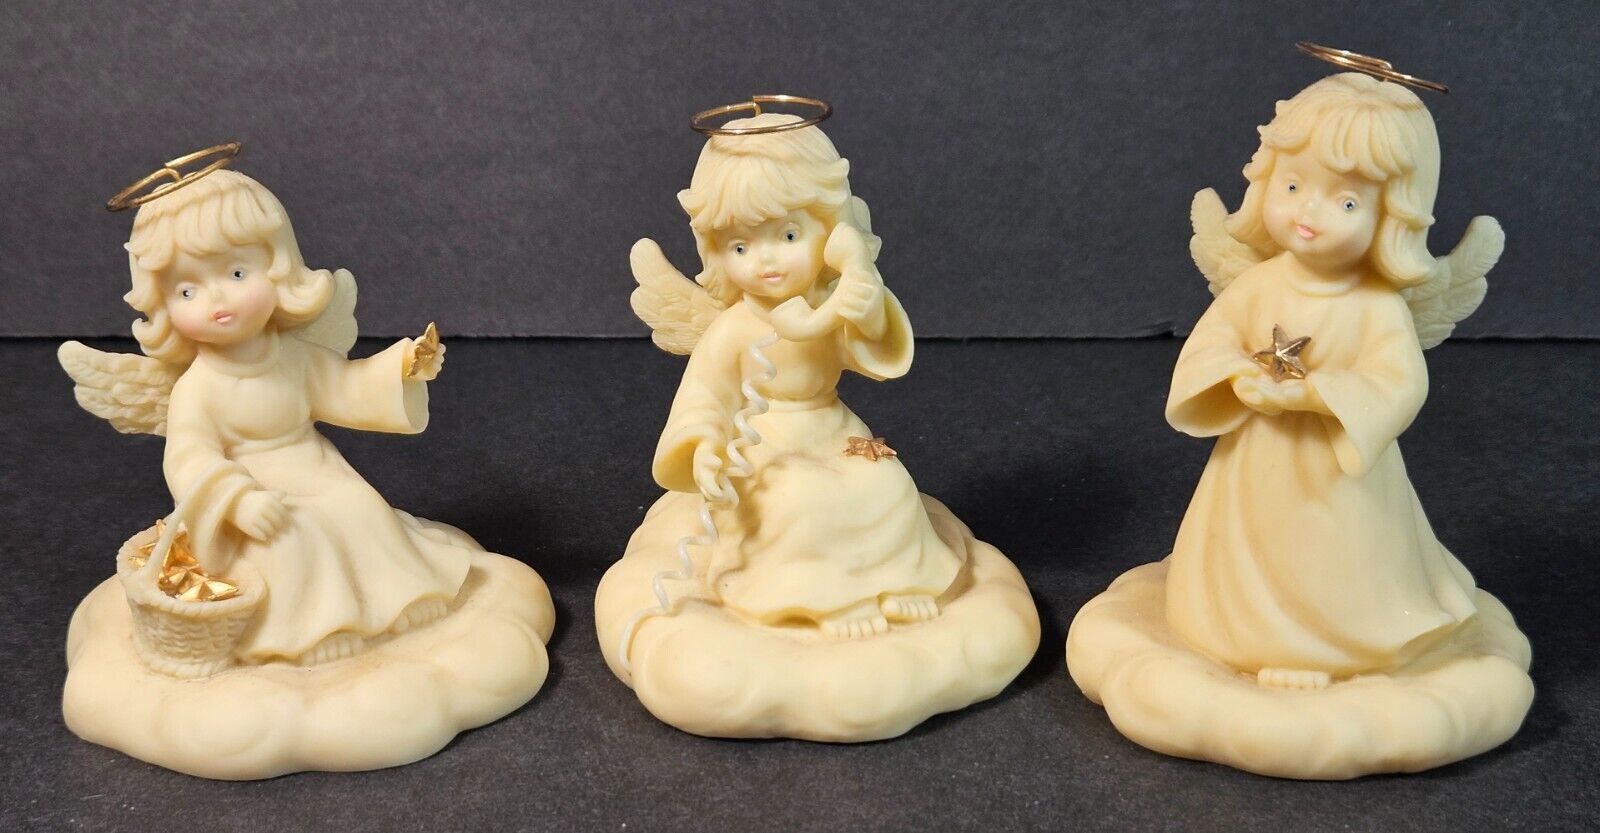 Vintage Studio Collection Tom Rubel Heavenly Angels Figurines Collectible Estate